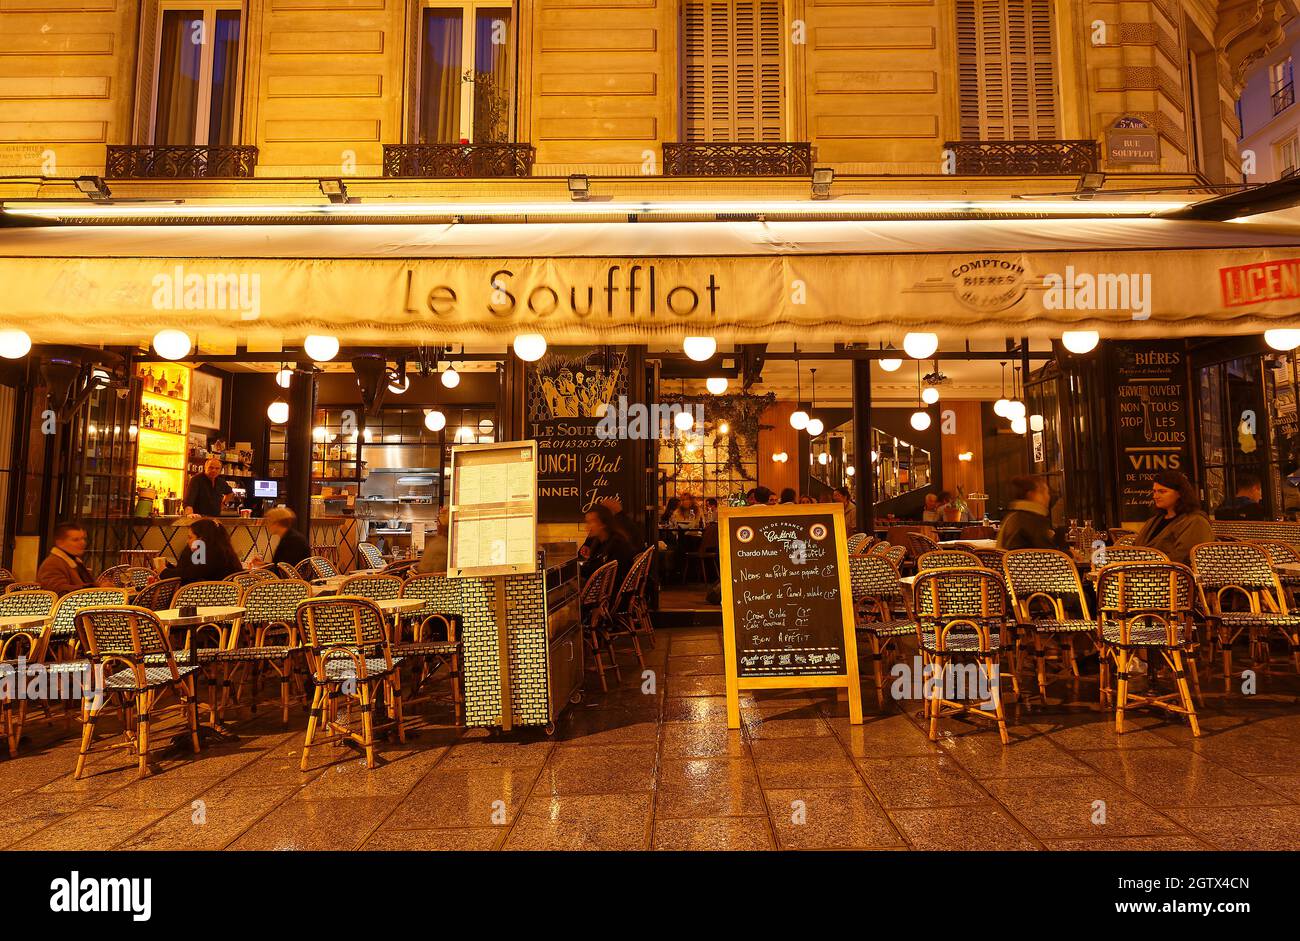 The French traditional restaurant Le Soufflot located in Latin quarter ...